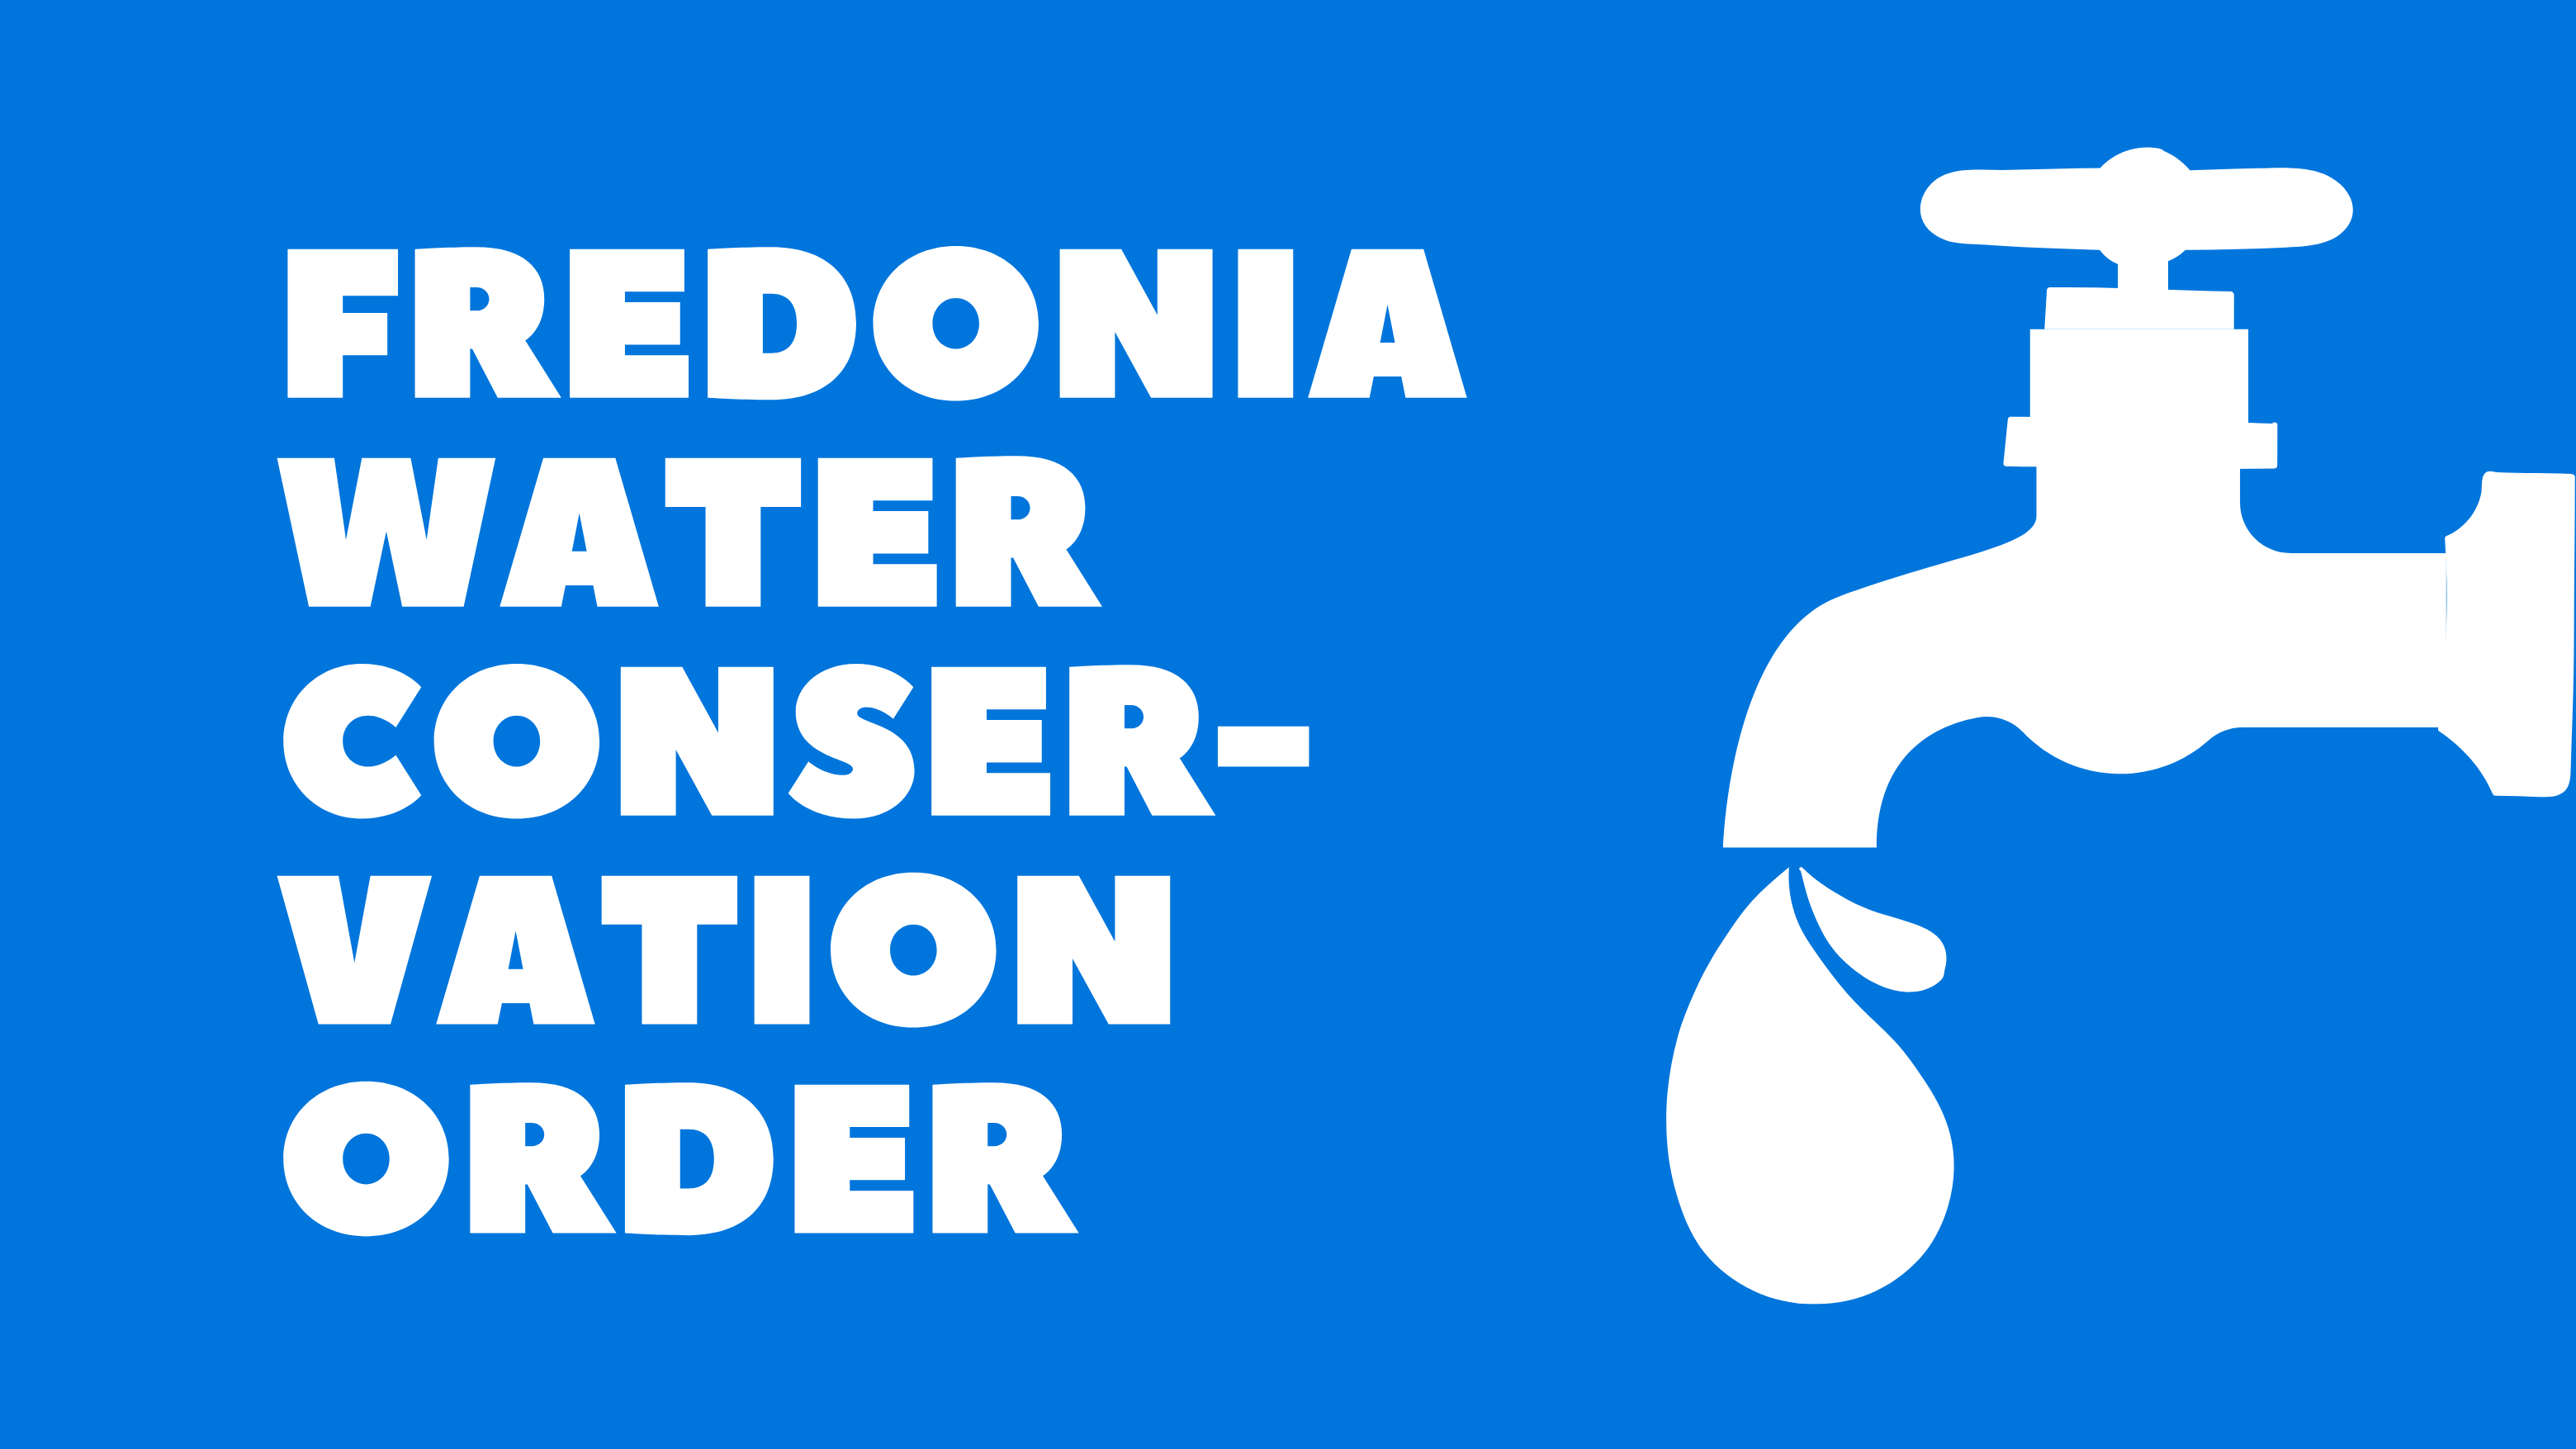 Fredonia Water Customers Urged to Conserve Amid Potential Boil Order